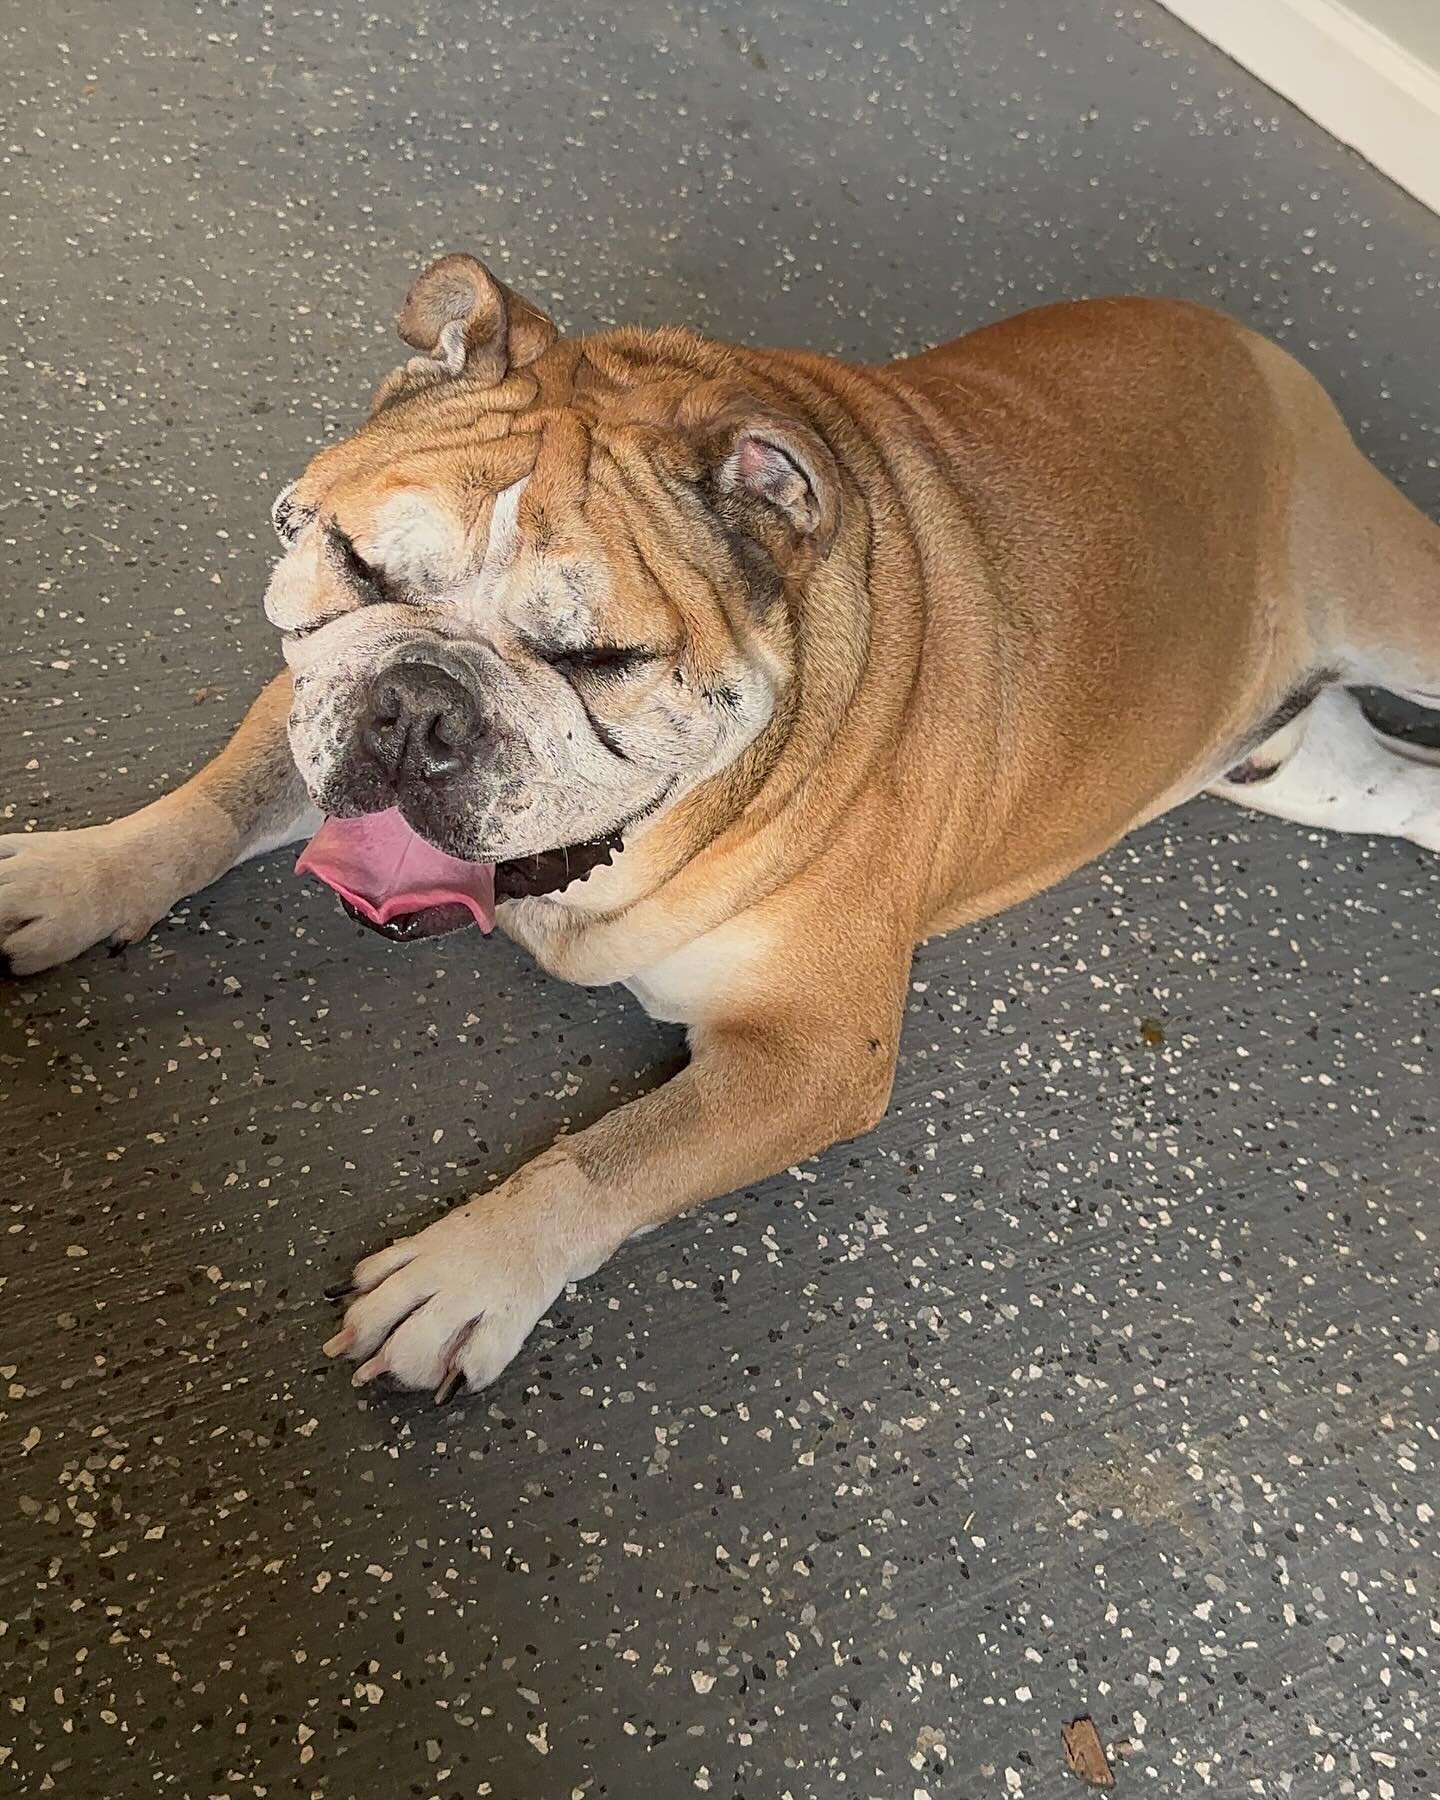 The only one i&rsquo;ll return back to work early for. But Mr. Hercules is here and healing. Bulldogs are going to bulldog, I guarantee you that. But there will be no bed humping or running this weekend Mister! Send my boy some healing energy 🩼🏥 #d